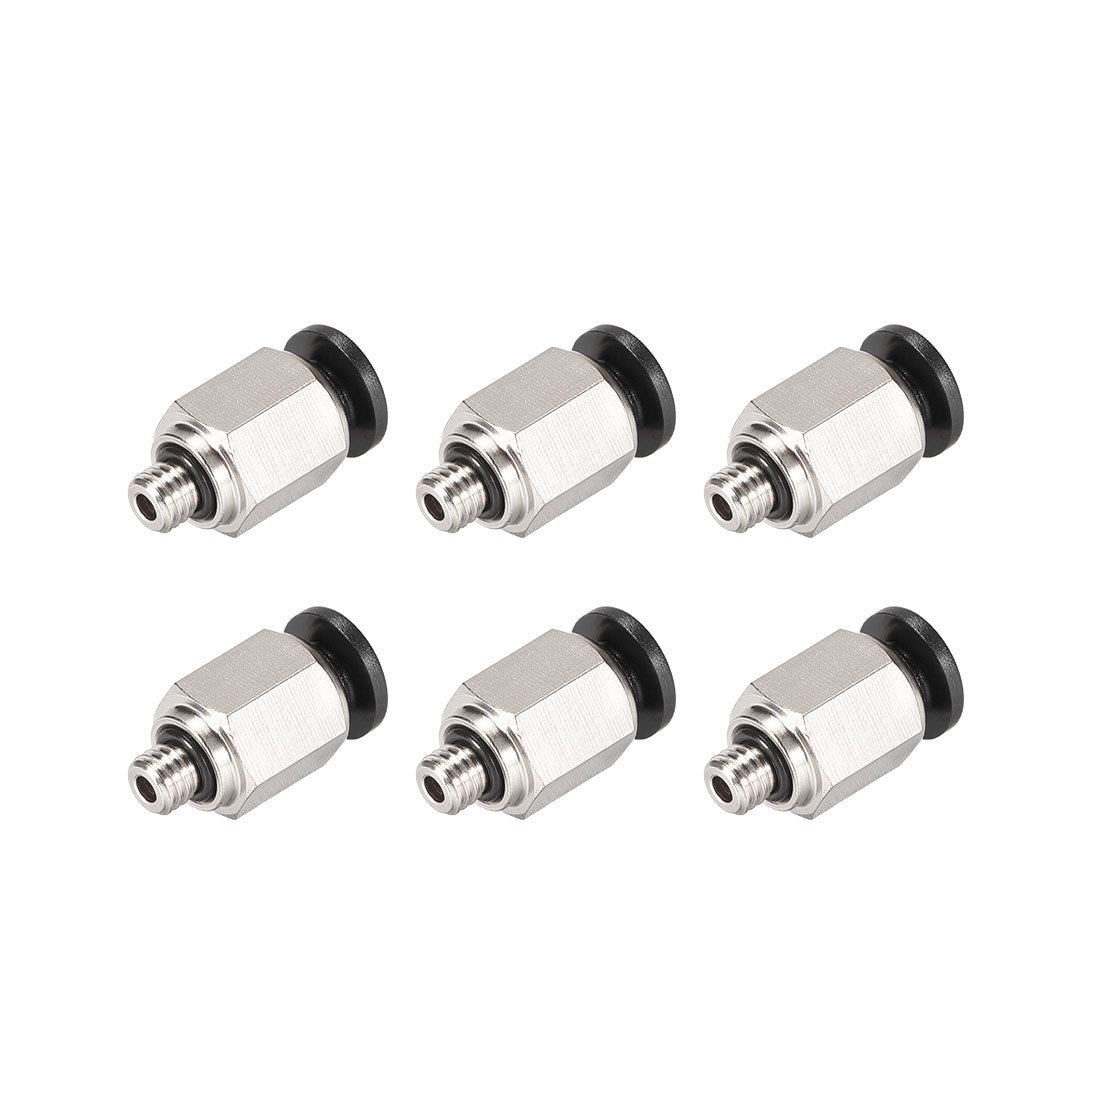 Uxcell Uxcell Straight Pneumatic Push to Quick Connect Fittings M5 Male x 6mm Tube OD Silver Tone 2pcs